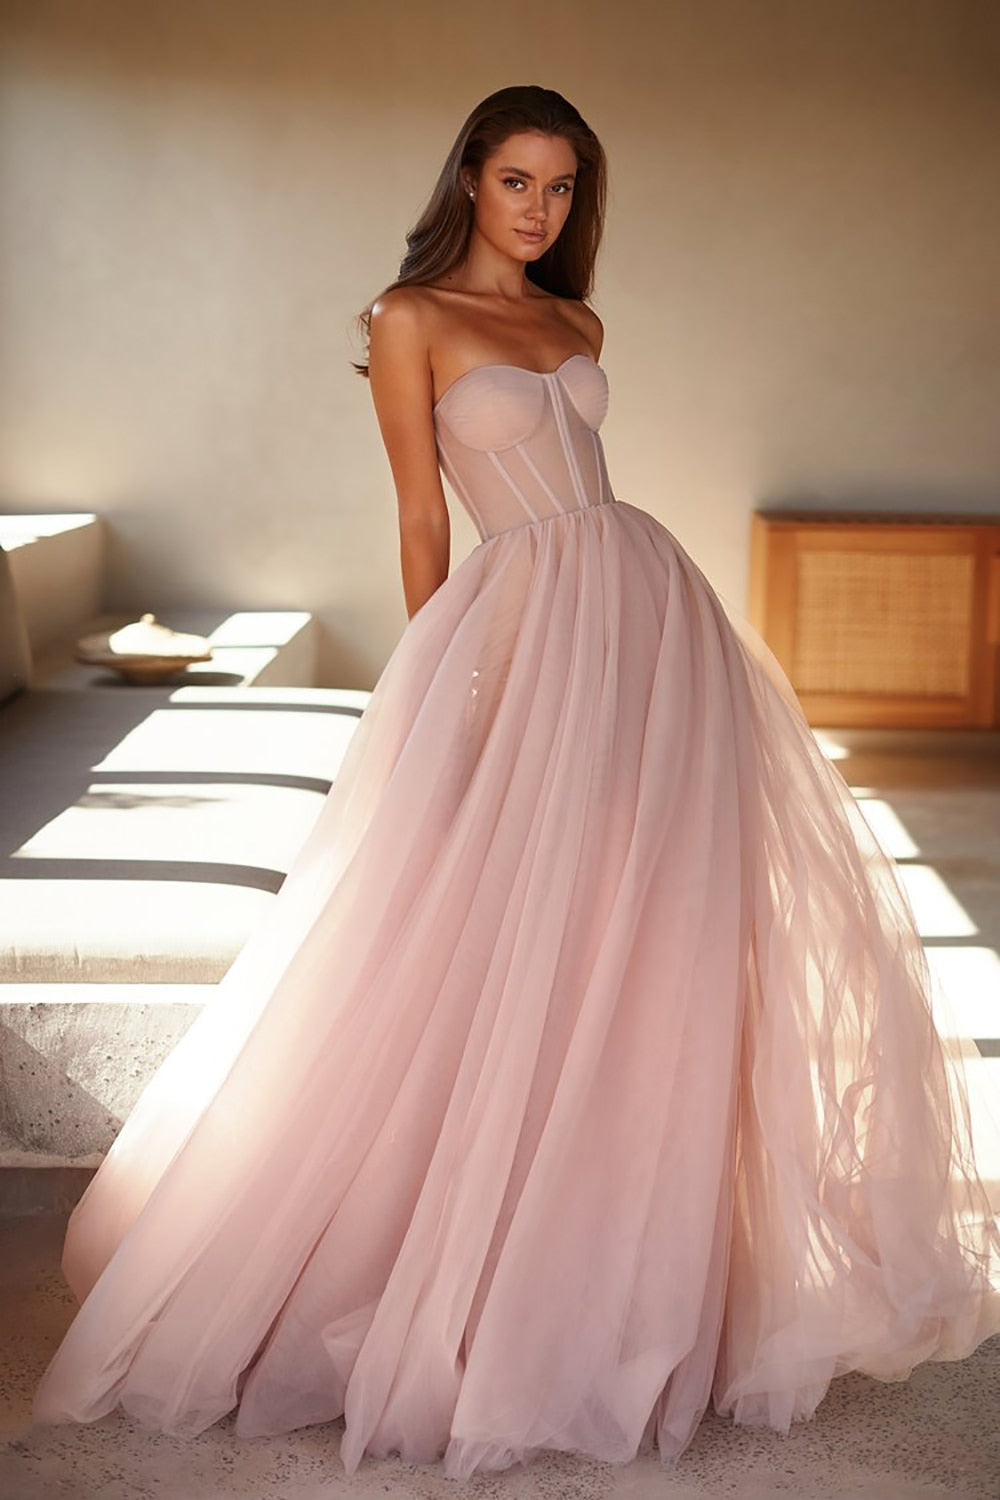 Cinessd  Long Prom Dresses 2022 Sweetheart A-Line Party Dresses Sleeveless Lace-Up Tulle Formal Gowns